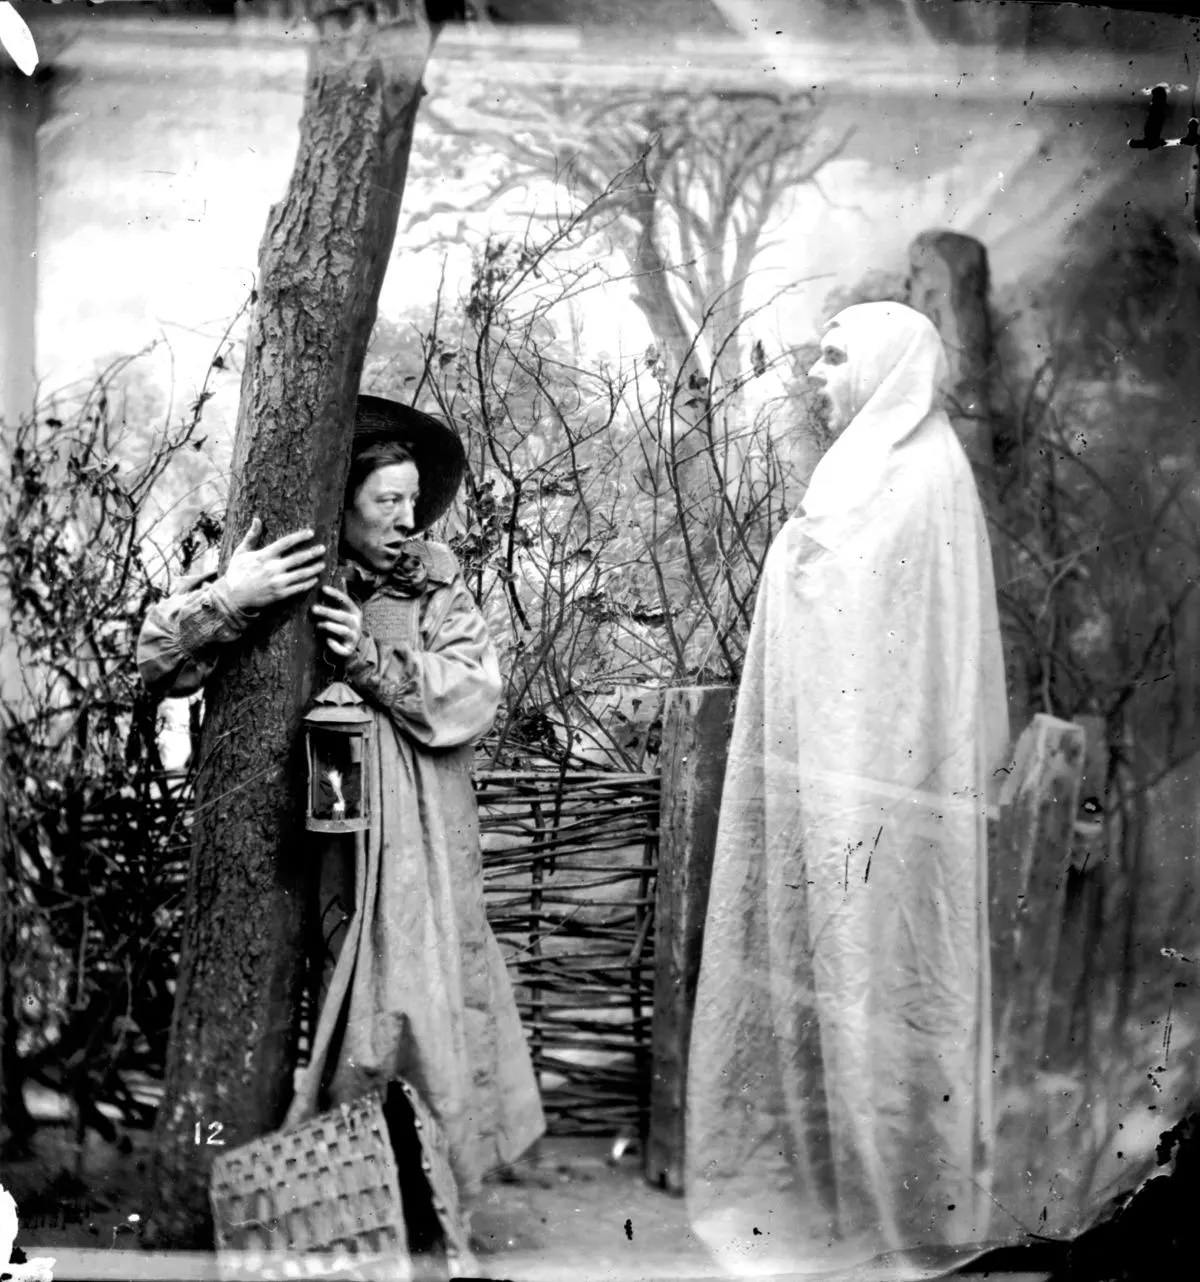 Photos of Ghosts and Spirits that Frightened the Victorian People, 1865